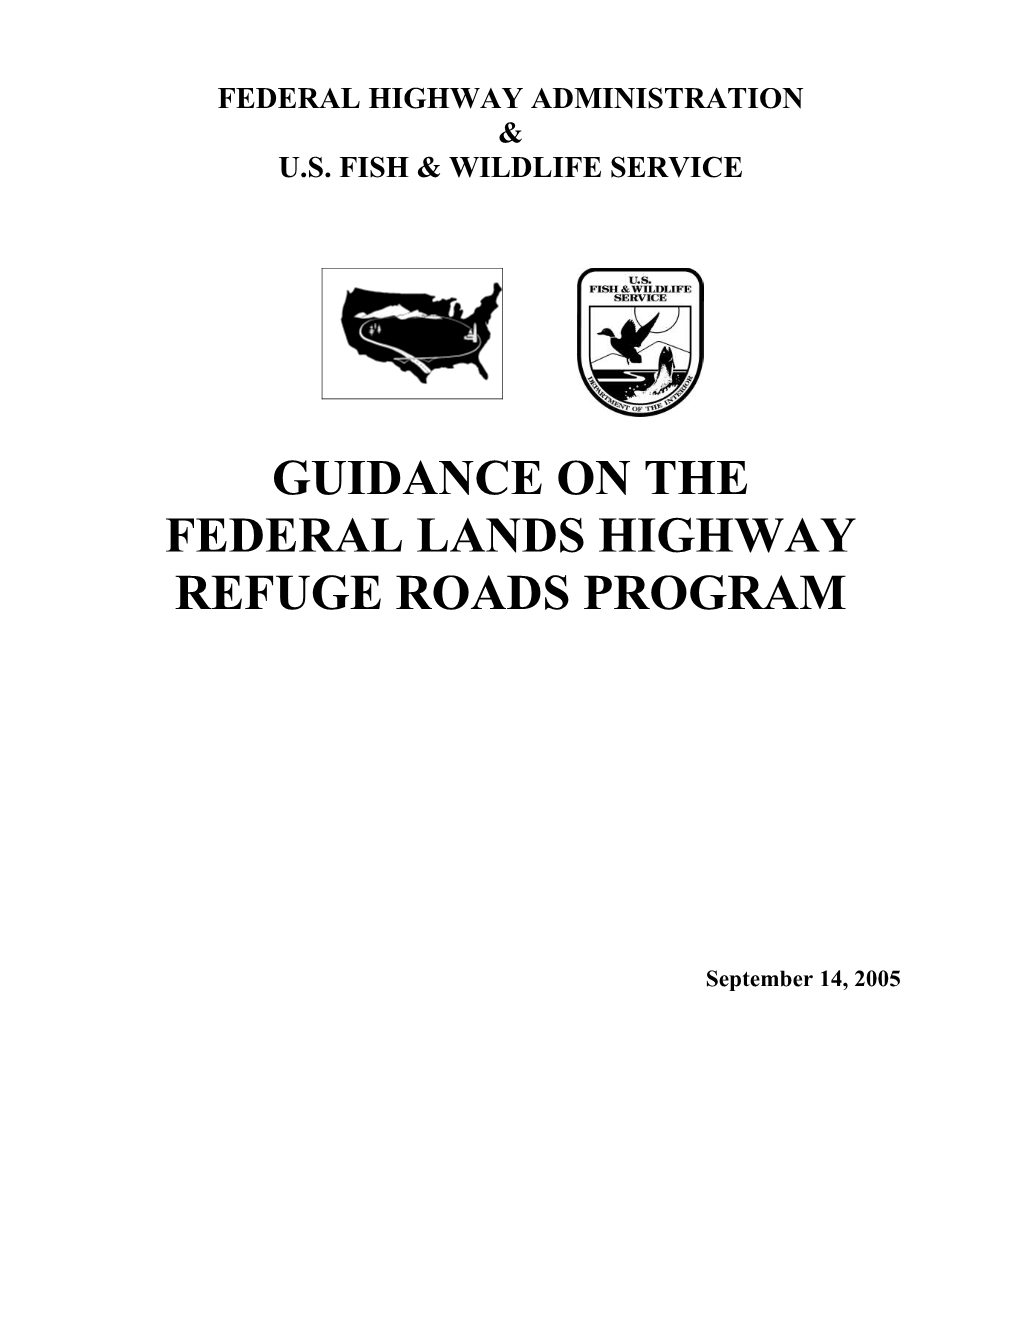 Federal Highway Administration s1